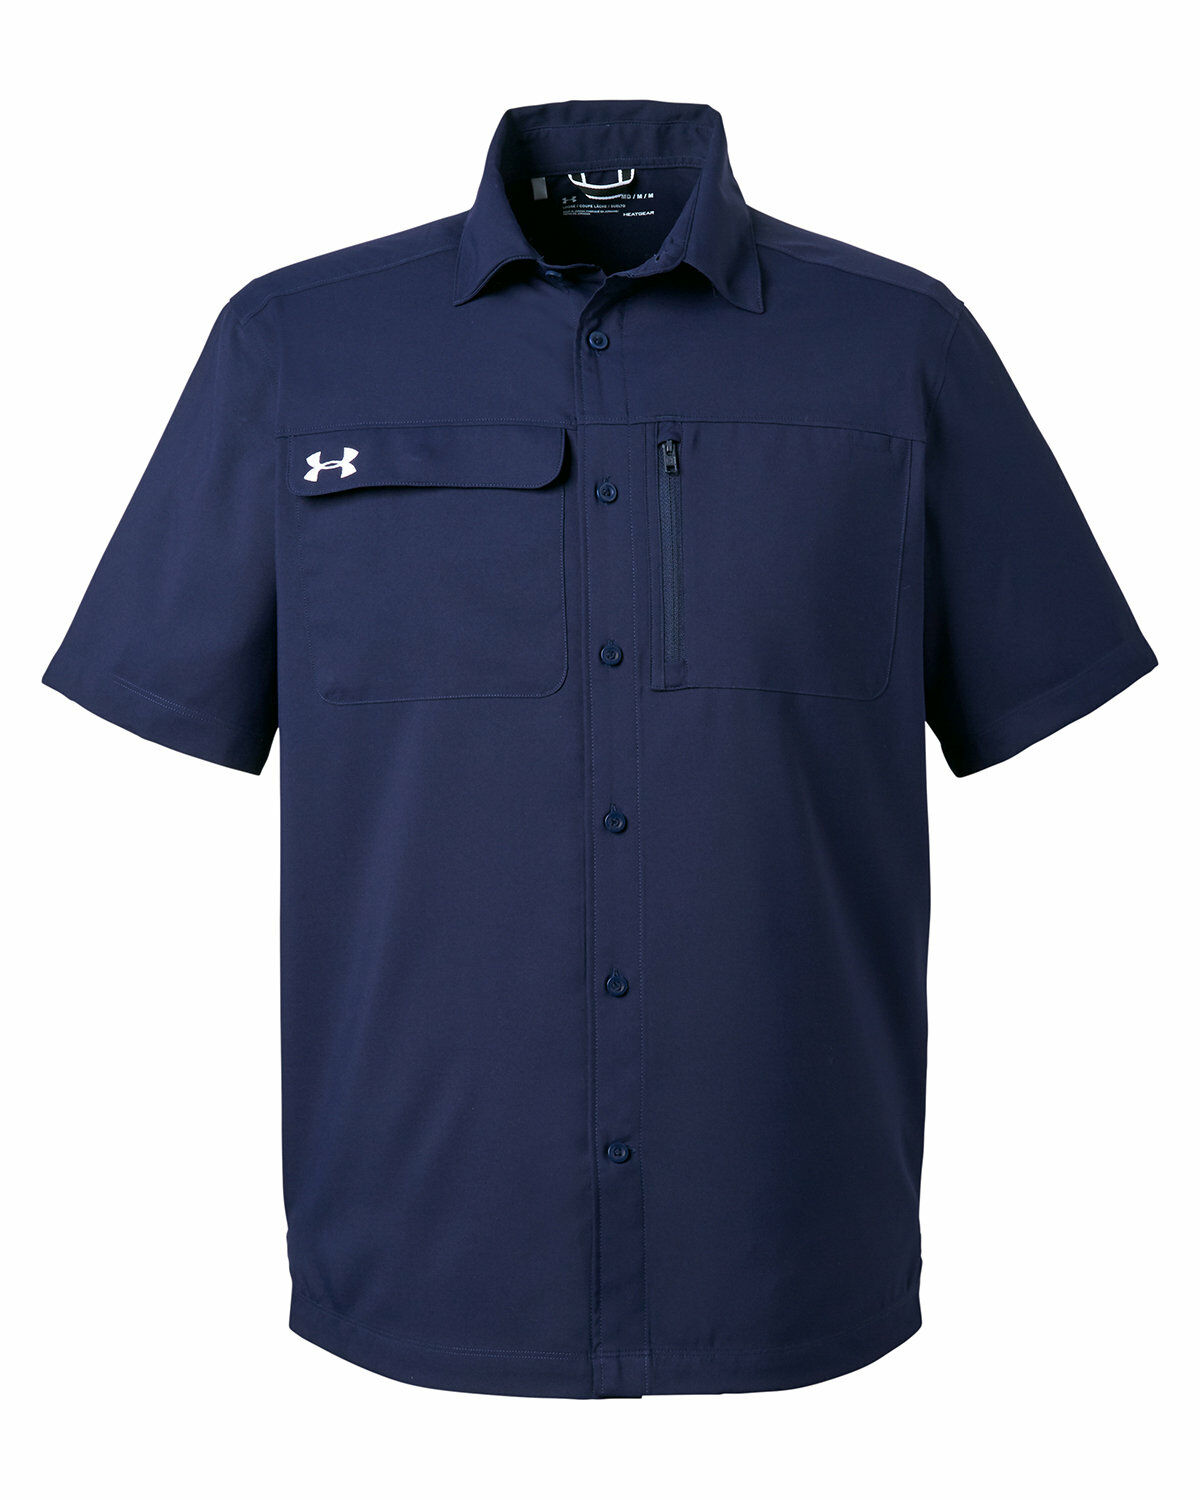 Custom Branded Under Armour Button Up - Midnight Navy/White